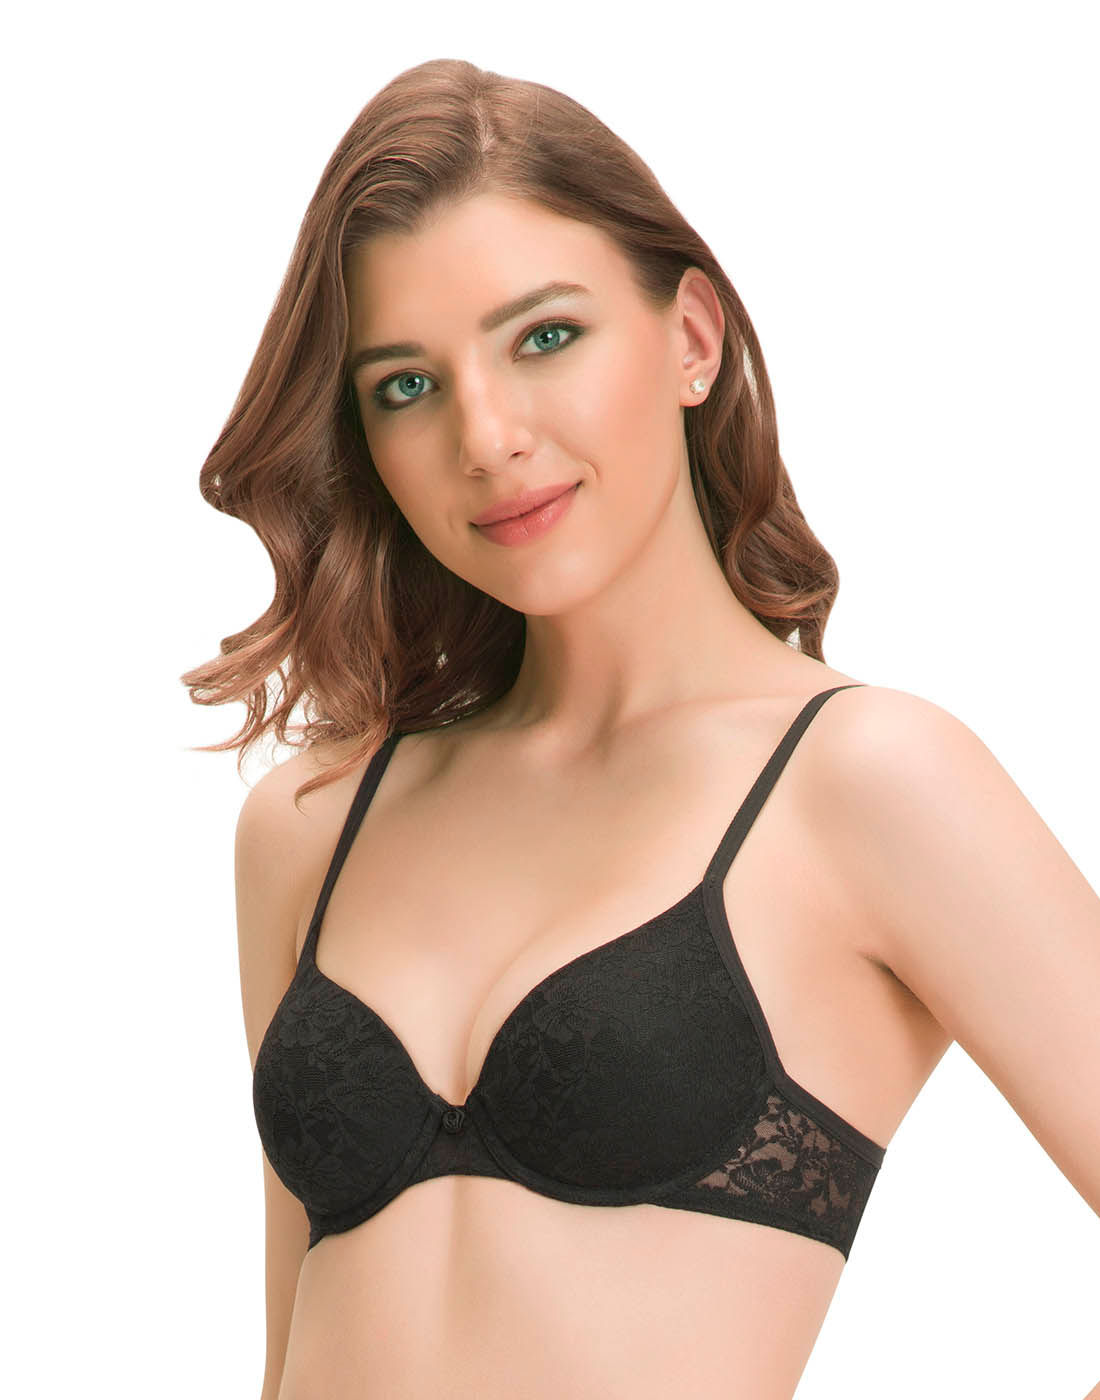 Floral Romance Padded Wired Lace Bra Amante 10301 – bare essentials